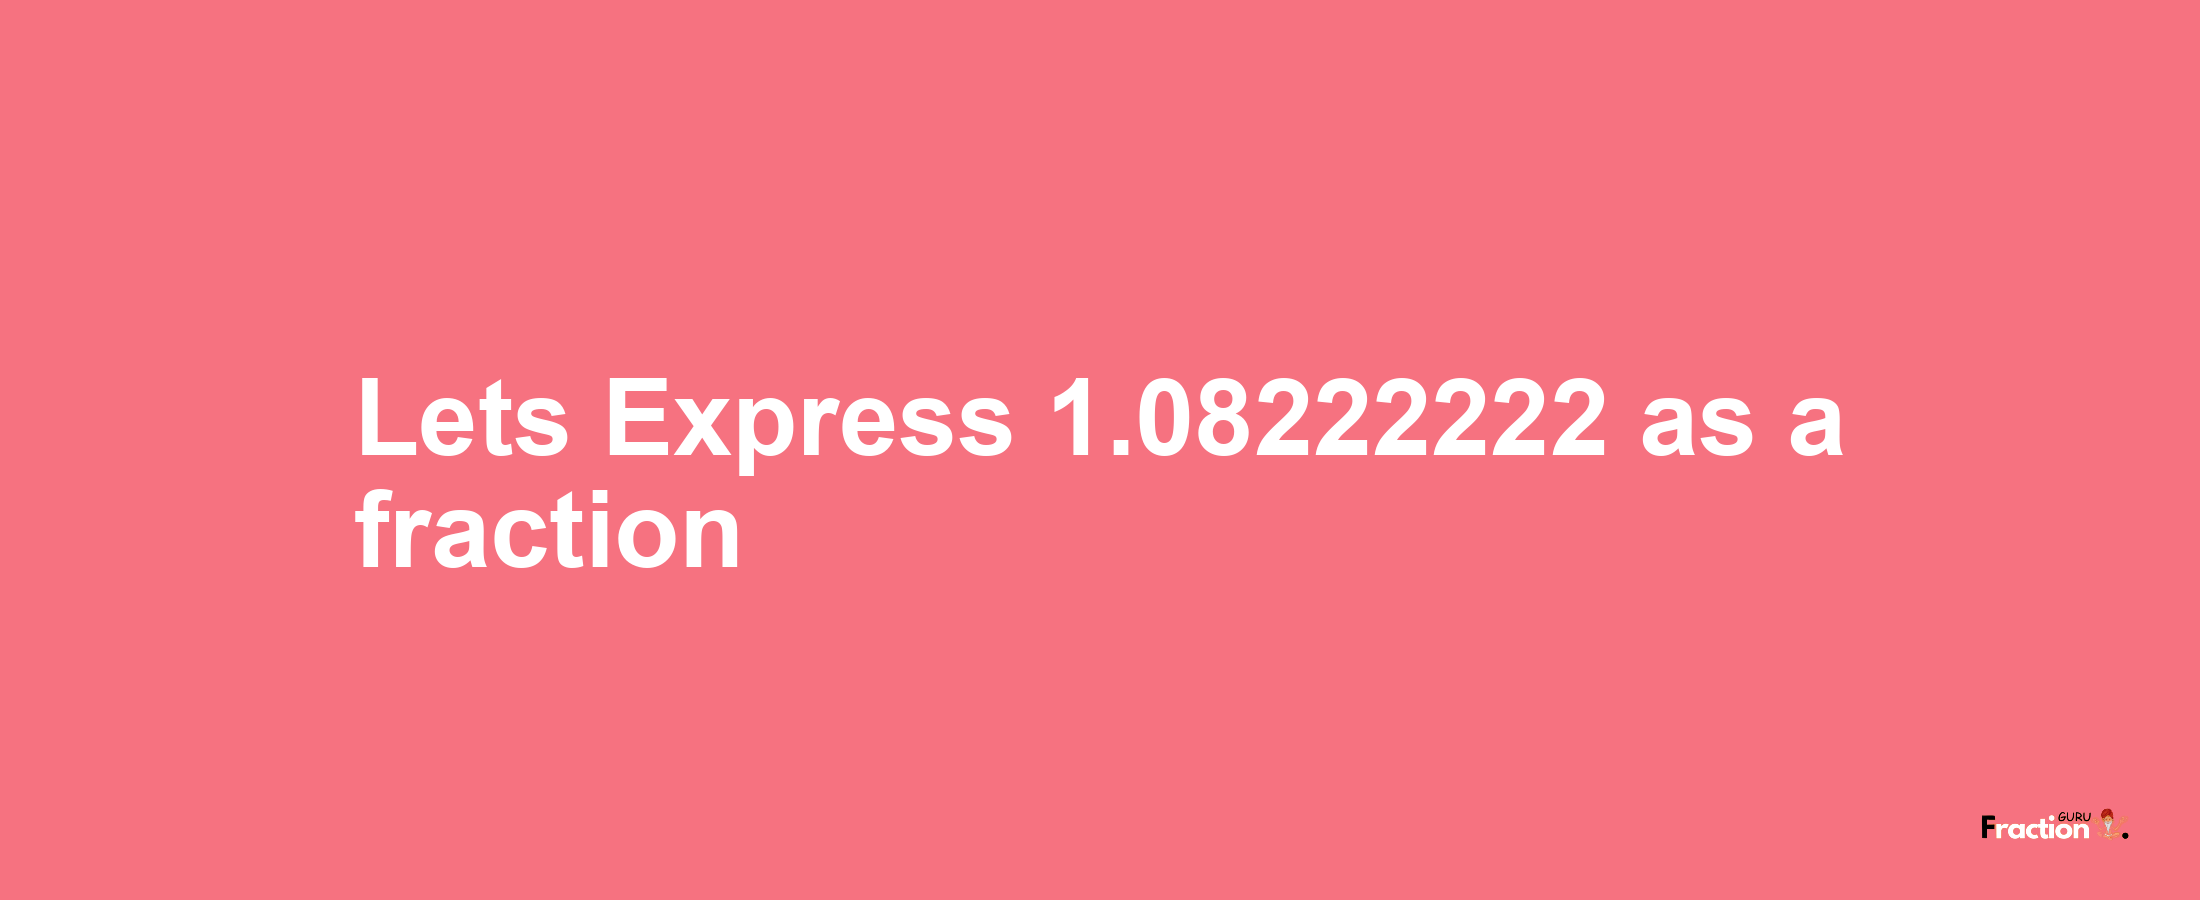 Lets Express 1.08222222 as afraction